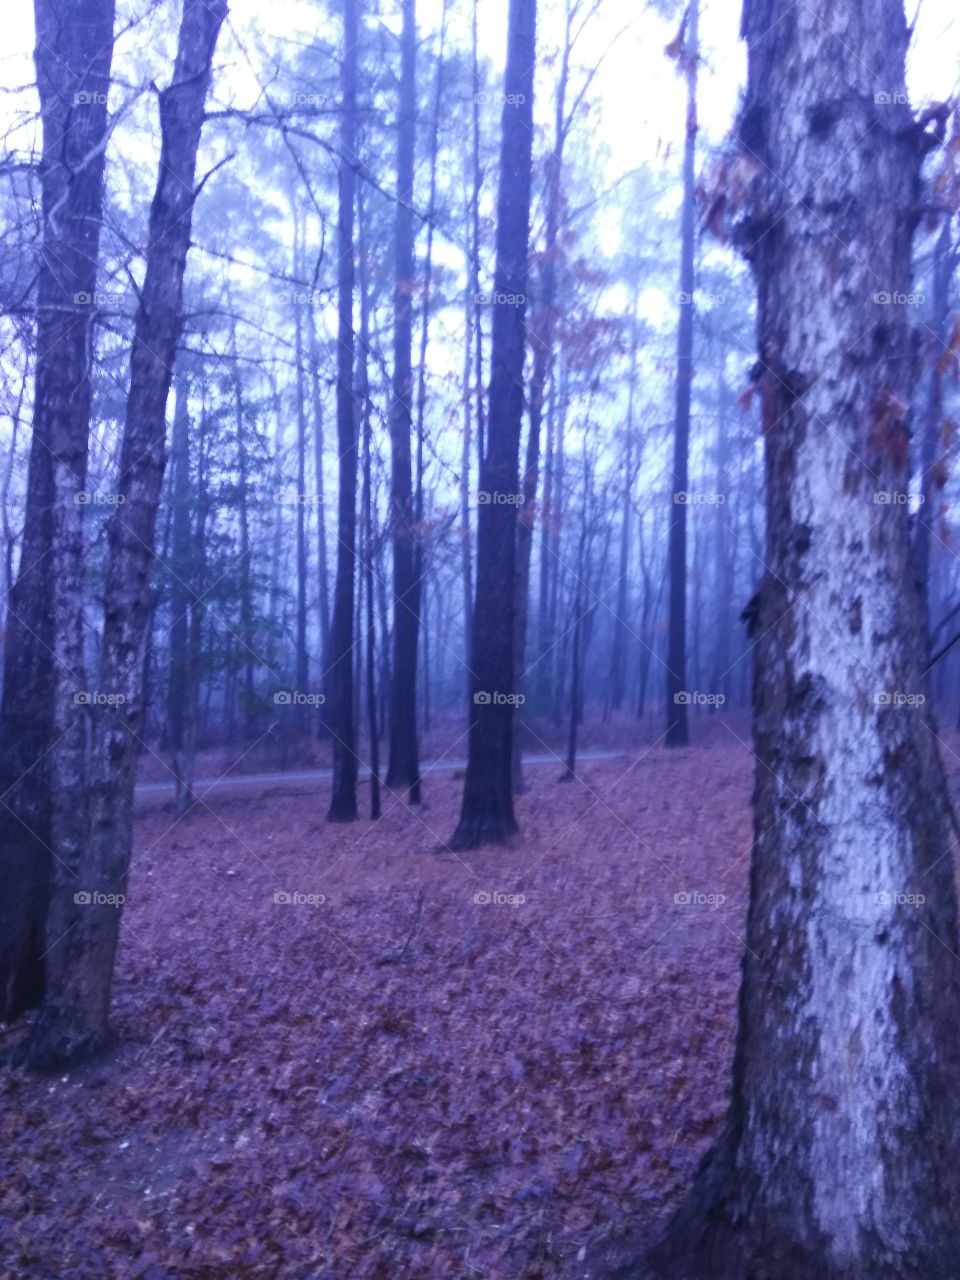 Misty morning in my front yard, just after the sun rose. the trees still look asleep. Cold wet day to sleep away.